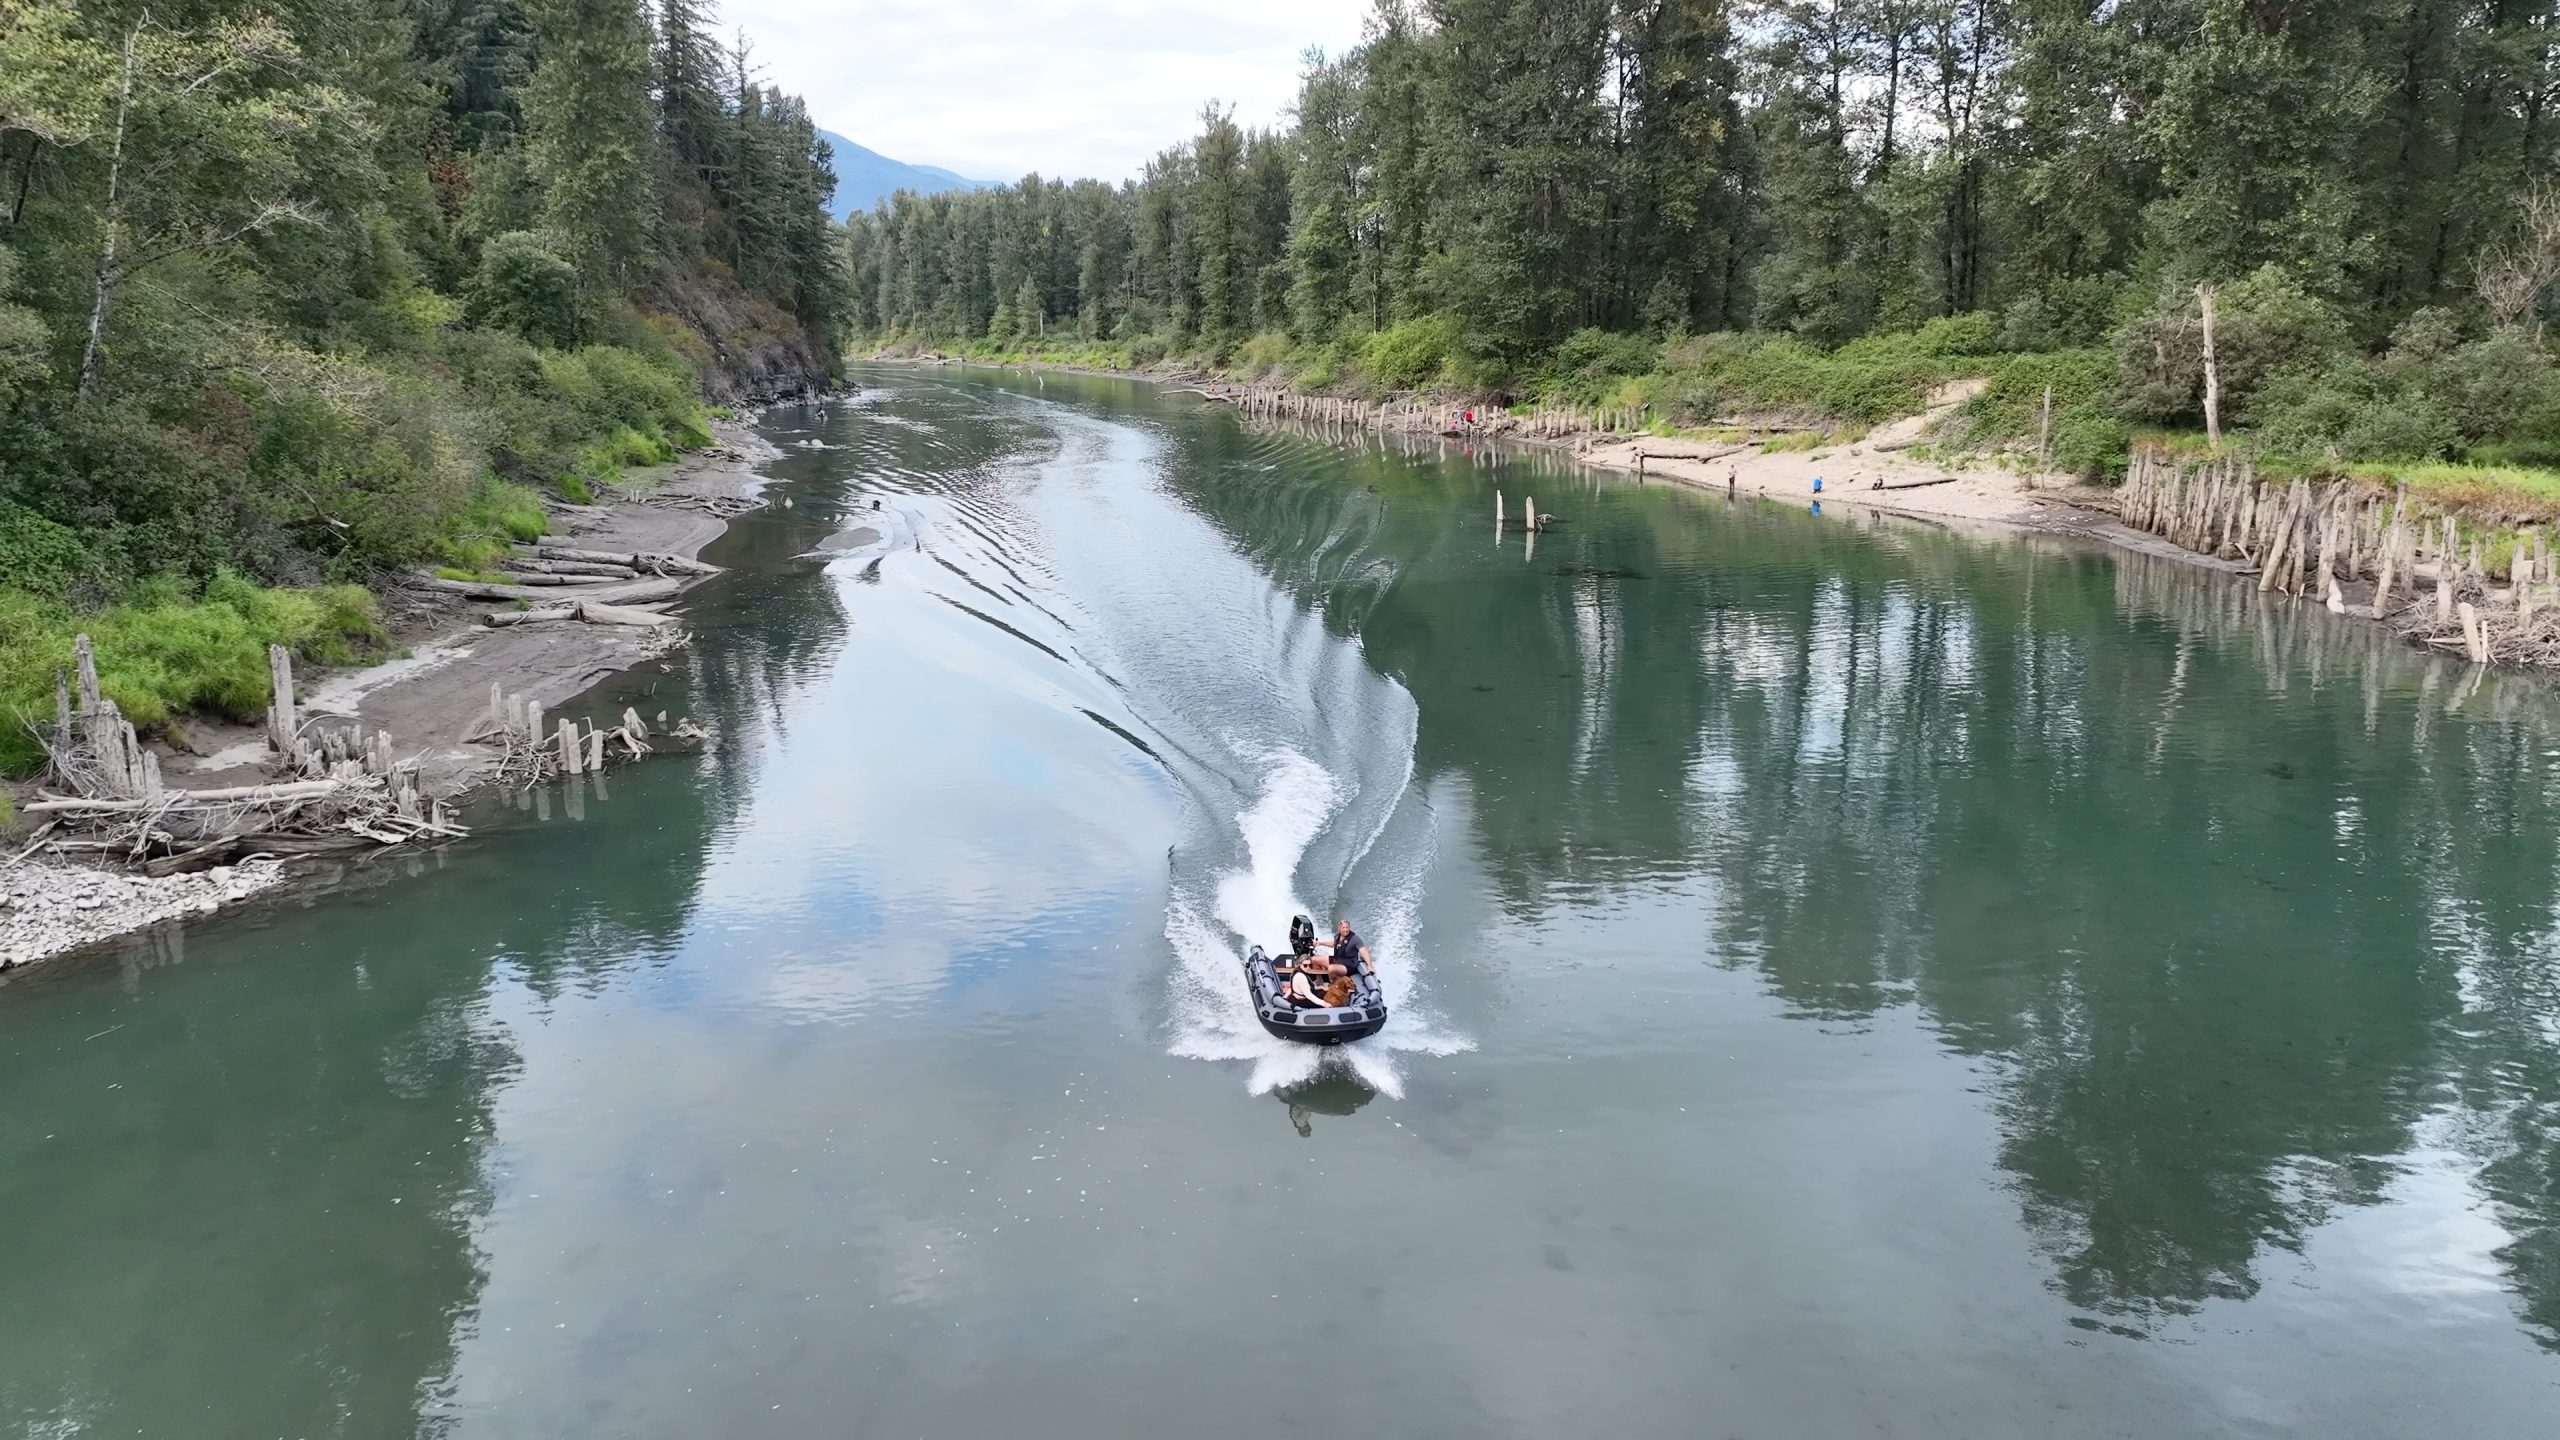 grey inflatable jet boat on the rivers of British Columbia Canada